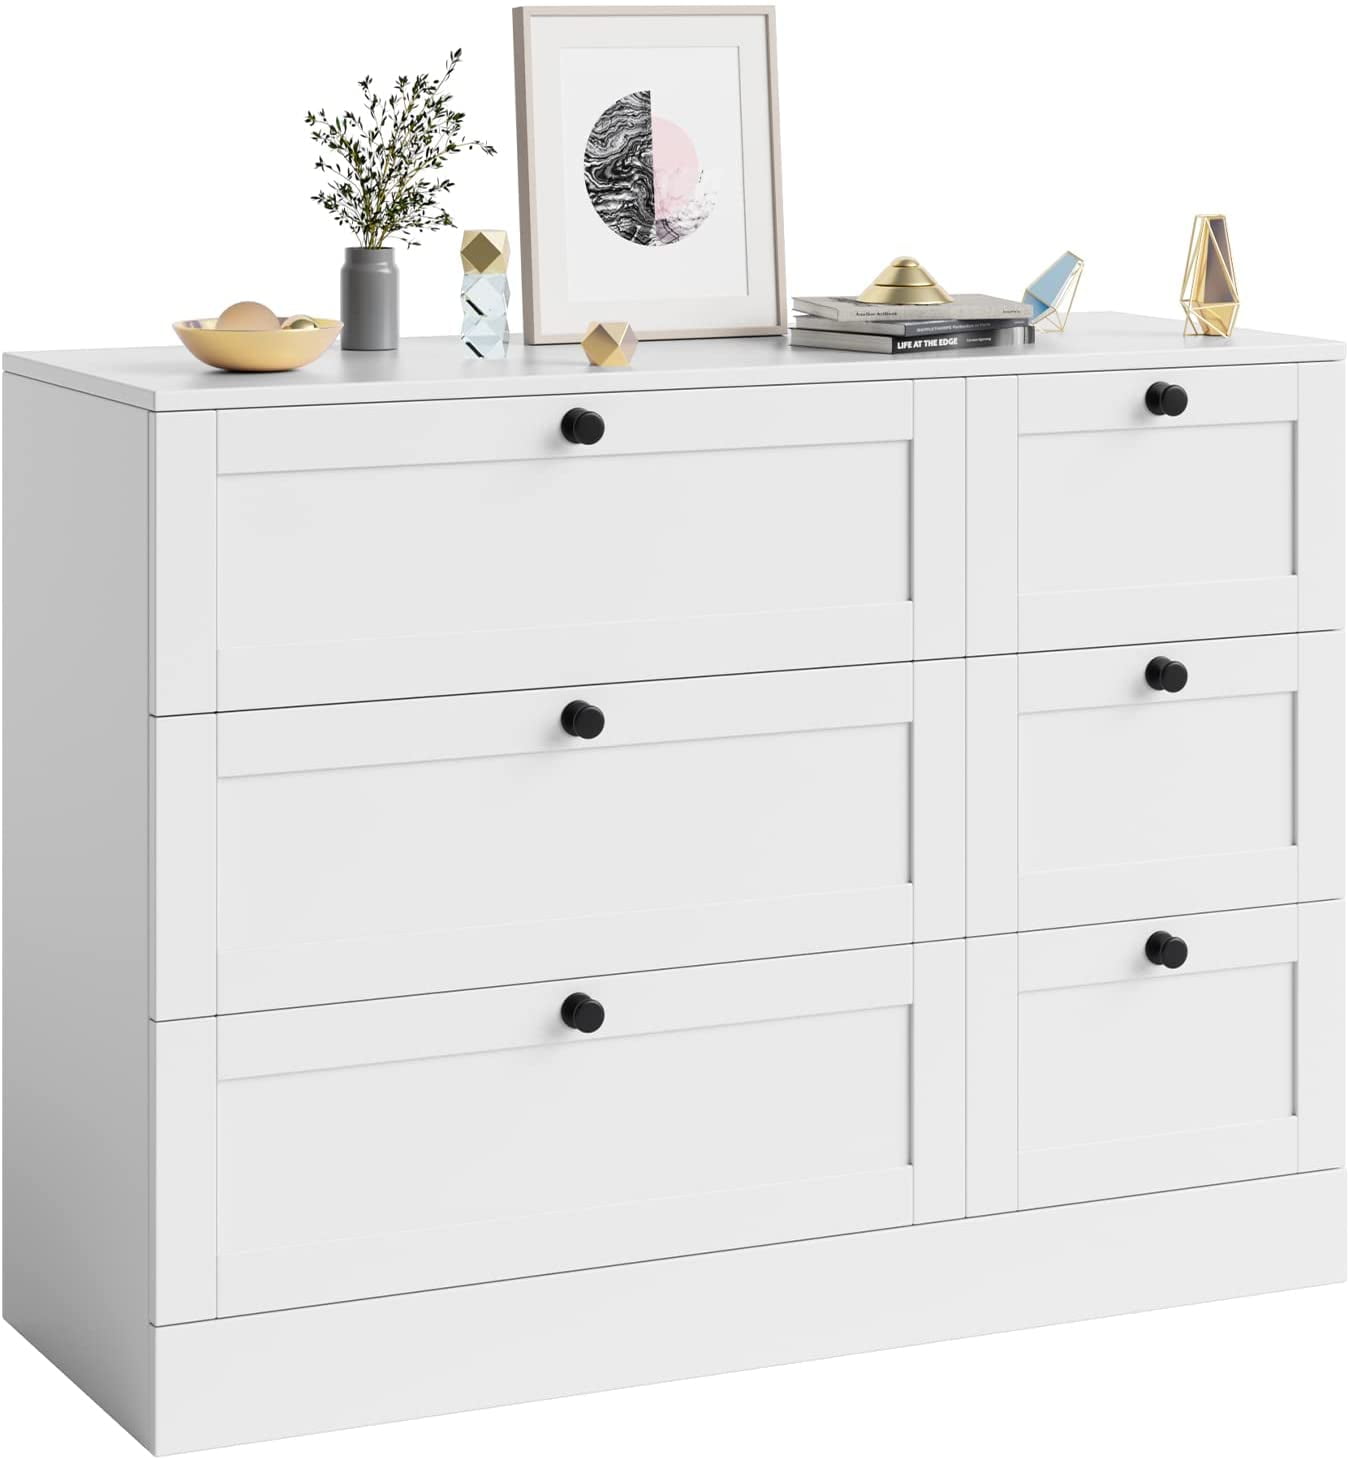 Homfa 6 Drawer White Double Dresser, Wood Storage Cabinet Chest of Drawers for Bedroom Living Room - image 4 of 7